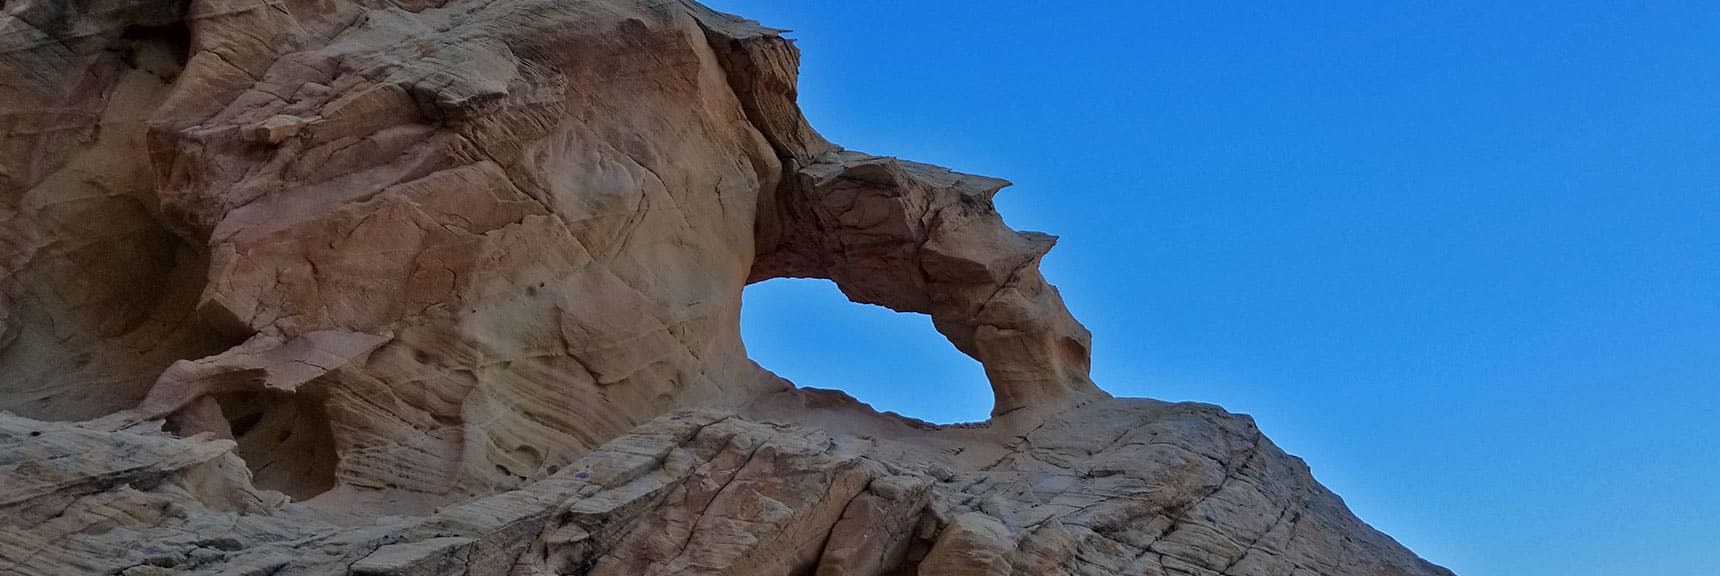 Arch Rock Formation in the Northern Canyon Wash on Prospect Trail in Valley of Fire State Park, Nevada